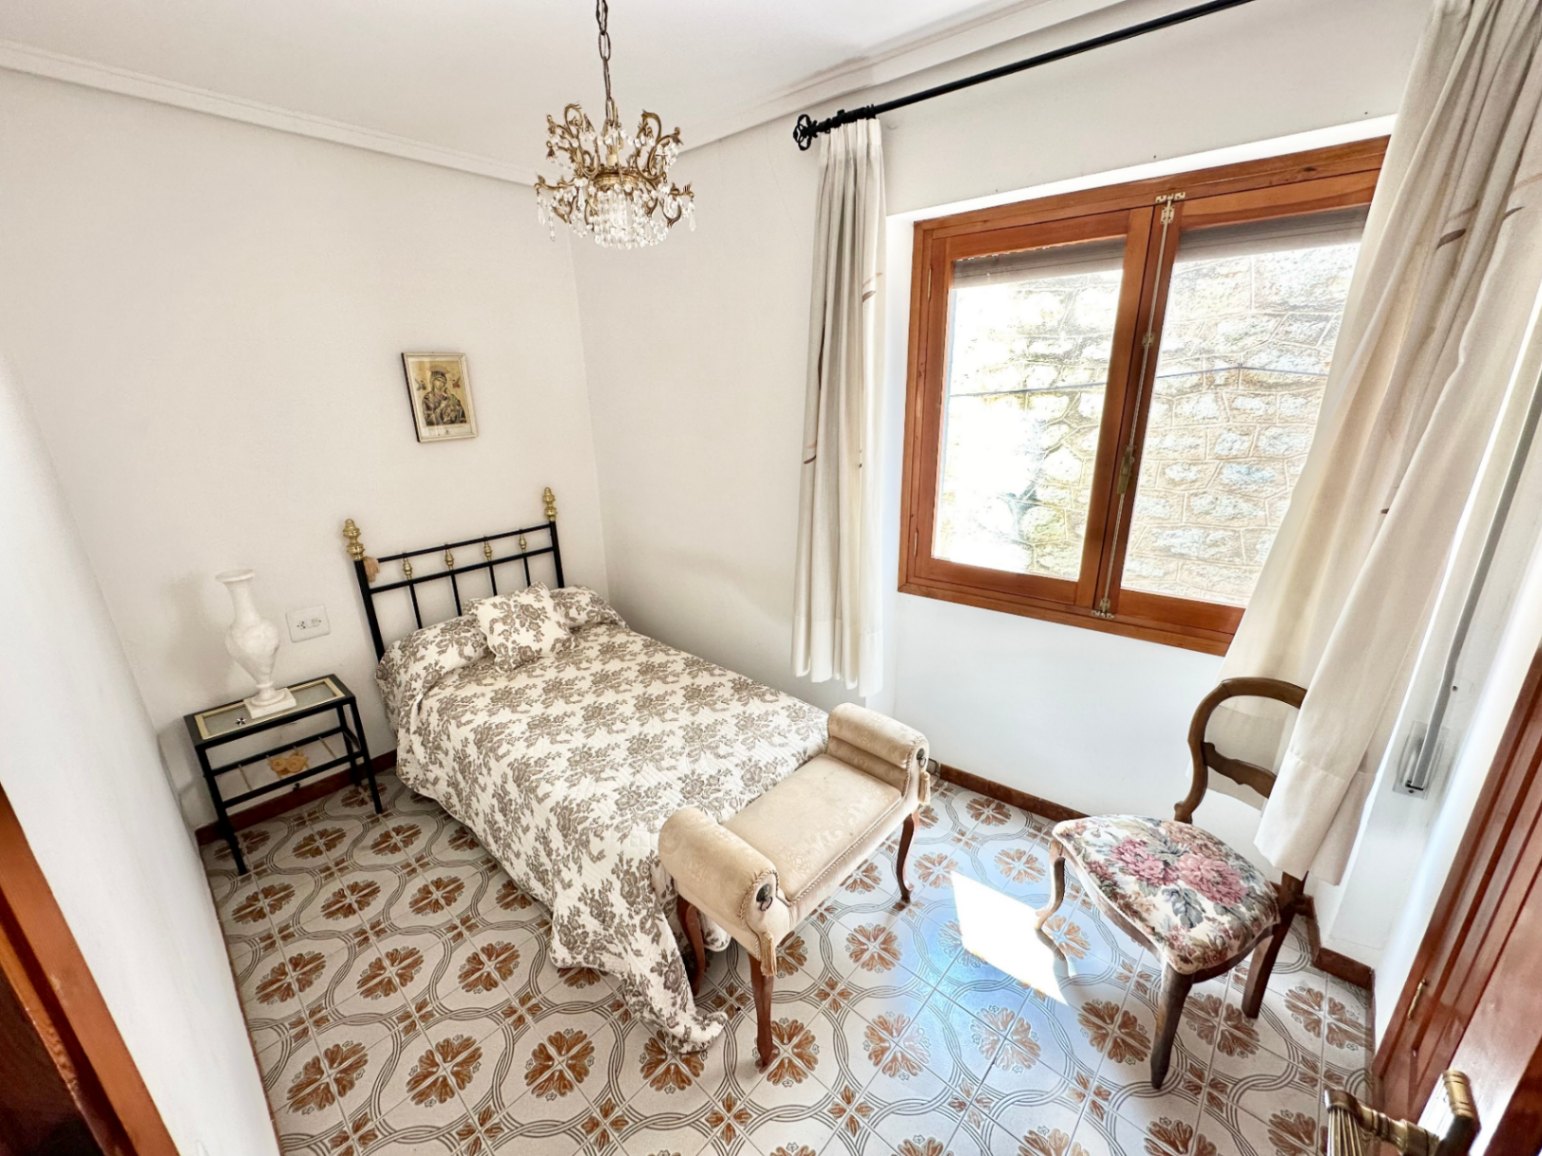 Apartment in the center of the village of Pego